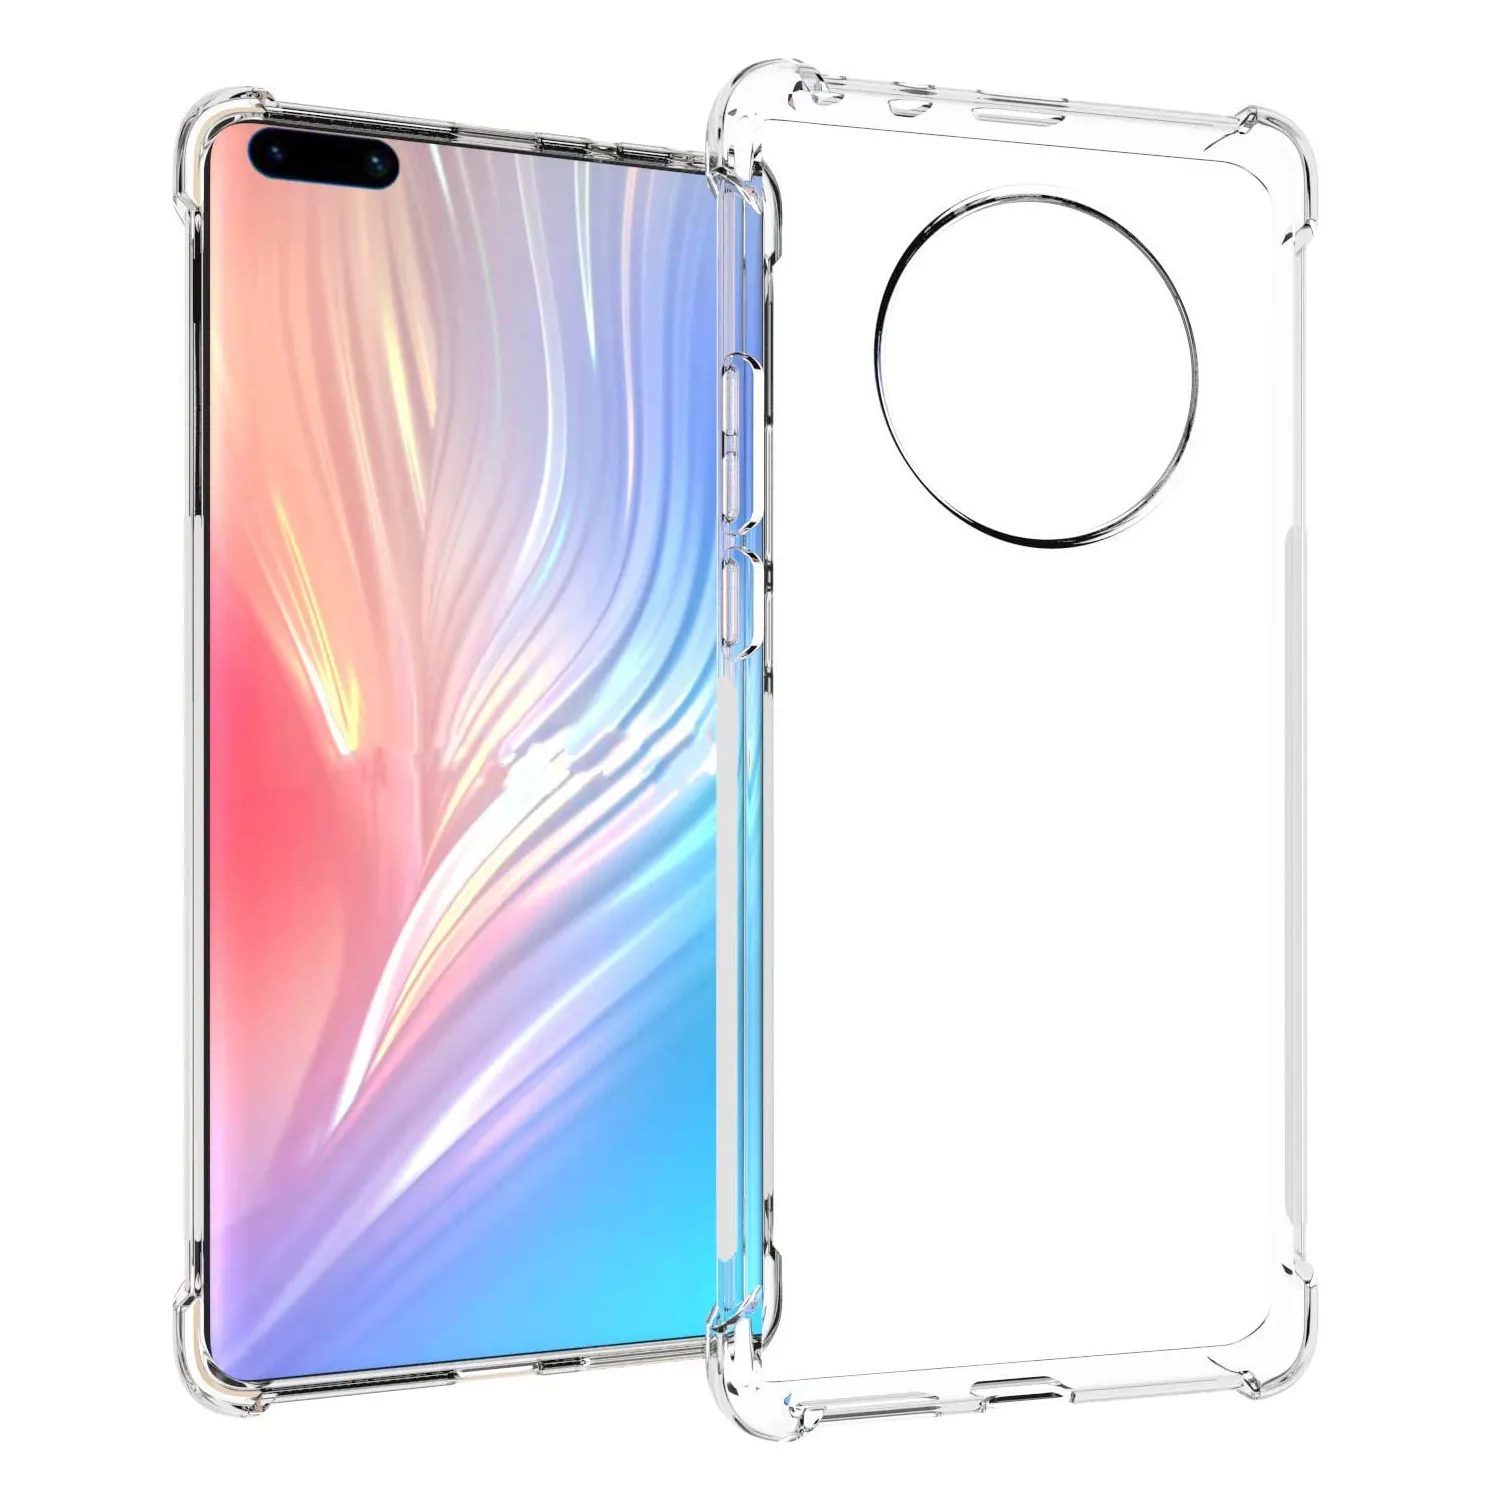 Tschick For Huawei Mate 40 P20 P30 P40 Lite Case 1.5mm Soft TPU Clear Back Cover Phone Cases For Huawei Mate 40 Pro 5G